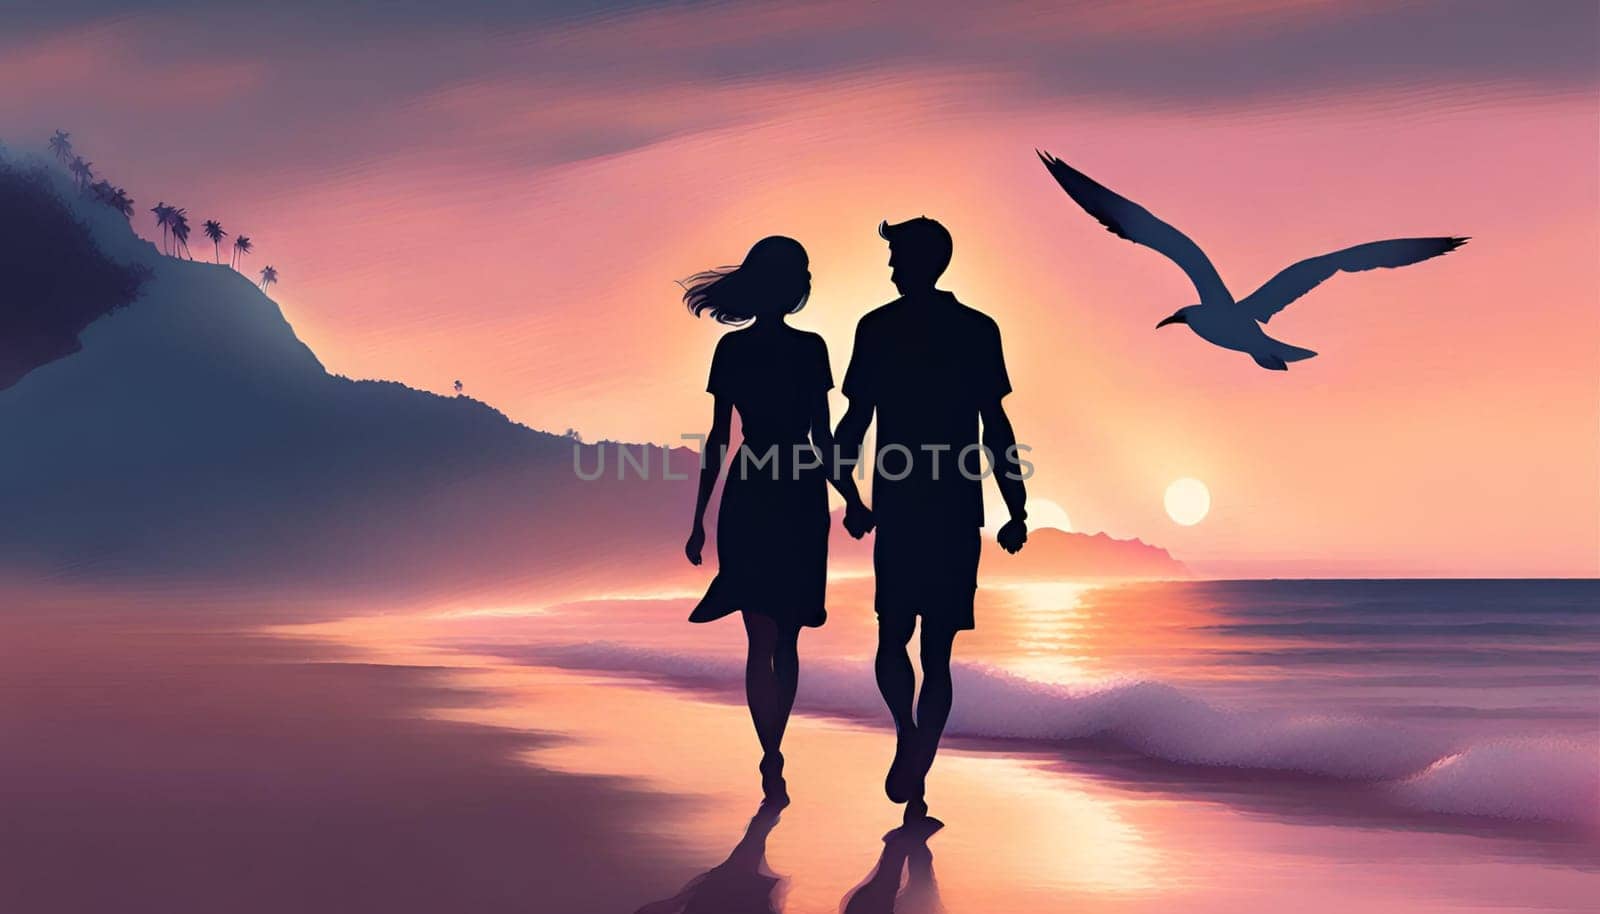 A couple holding hands and walking on a beach at sunset. The sky is orange and pink, and the ocean is calm. There are some seagulls flying in the distance. Happy Valentine's Day by Designlab